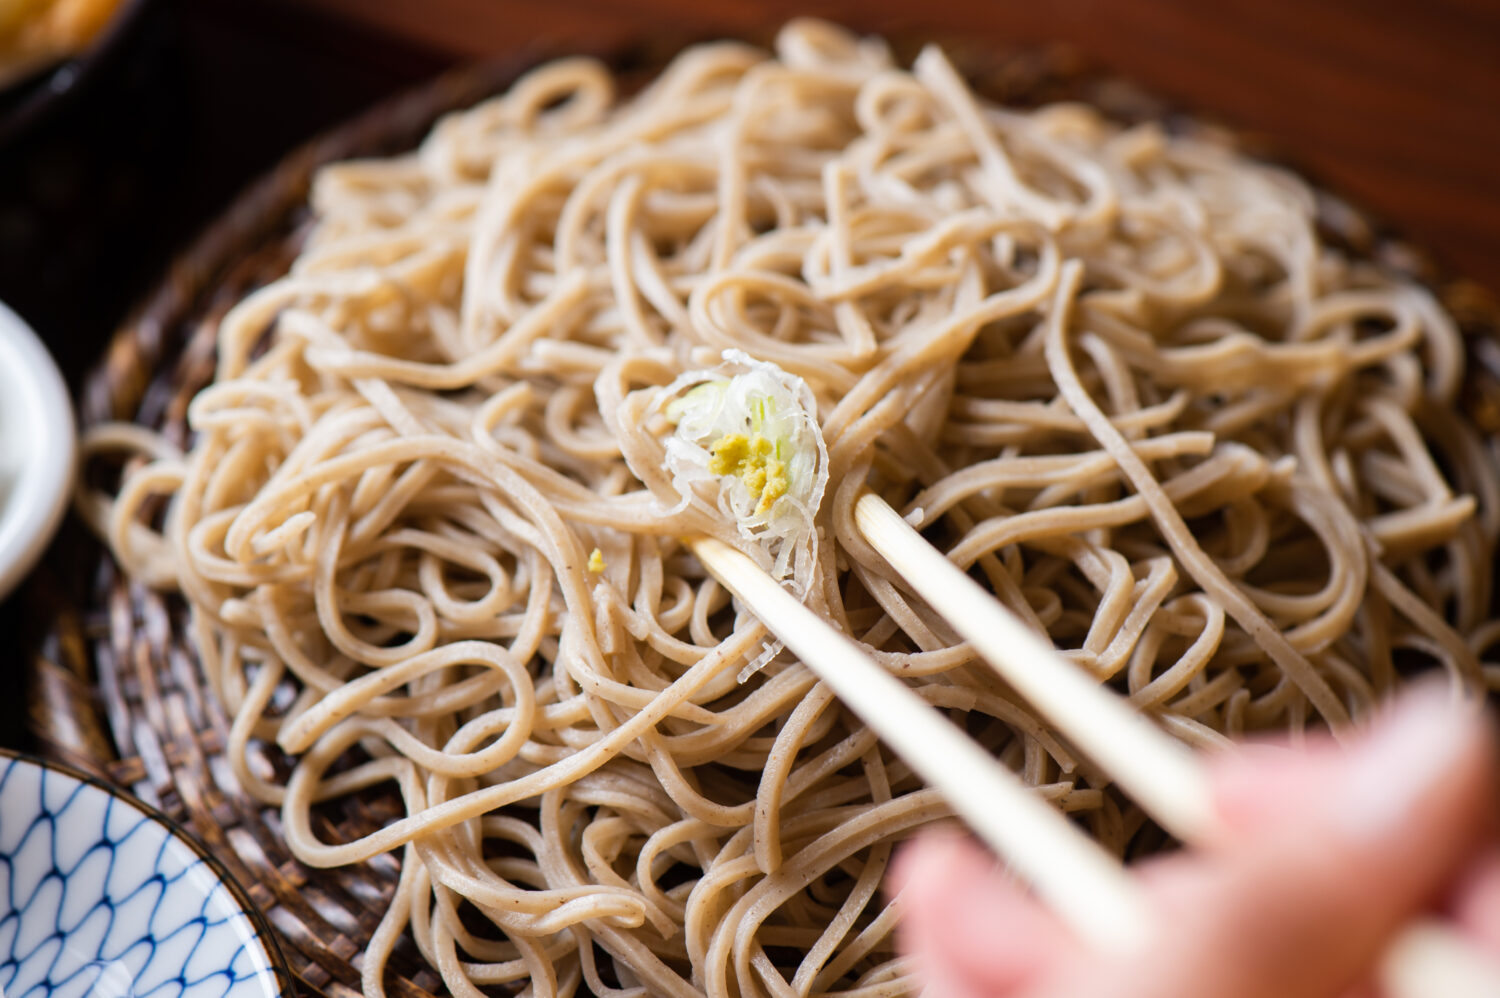 Add yakumi (aromatic condiments) to the noodles, not to the dipping sauce